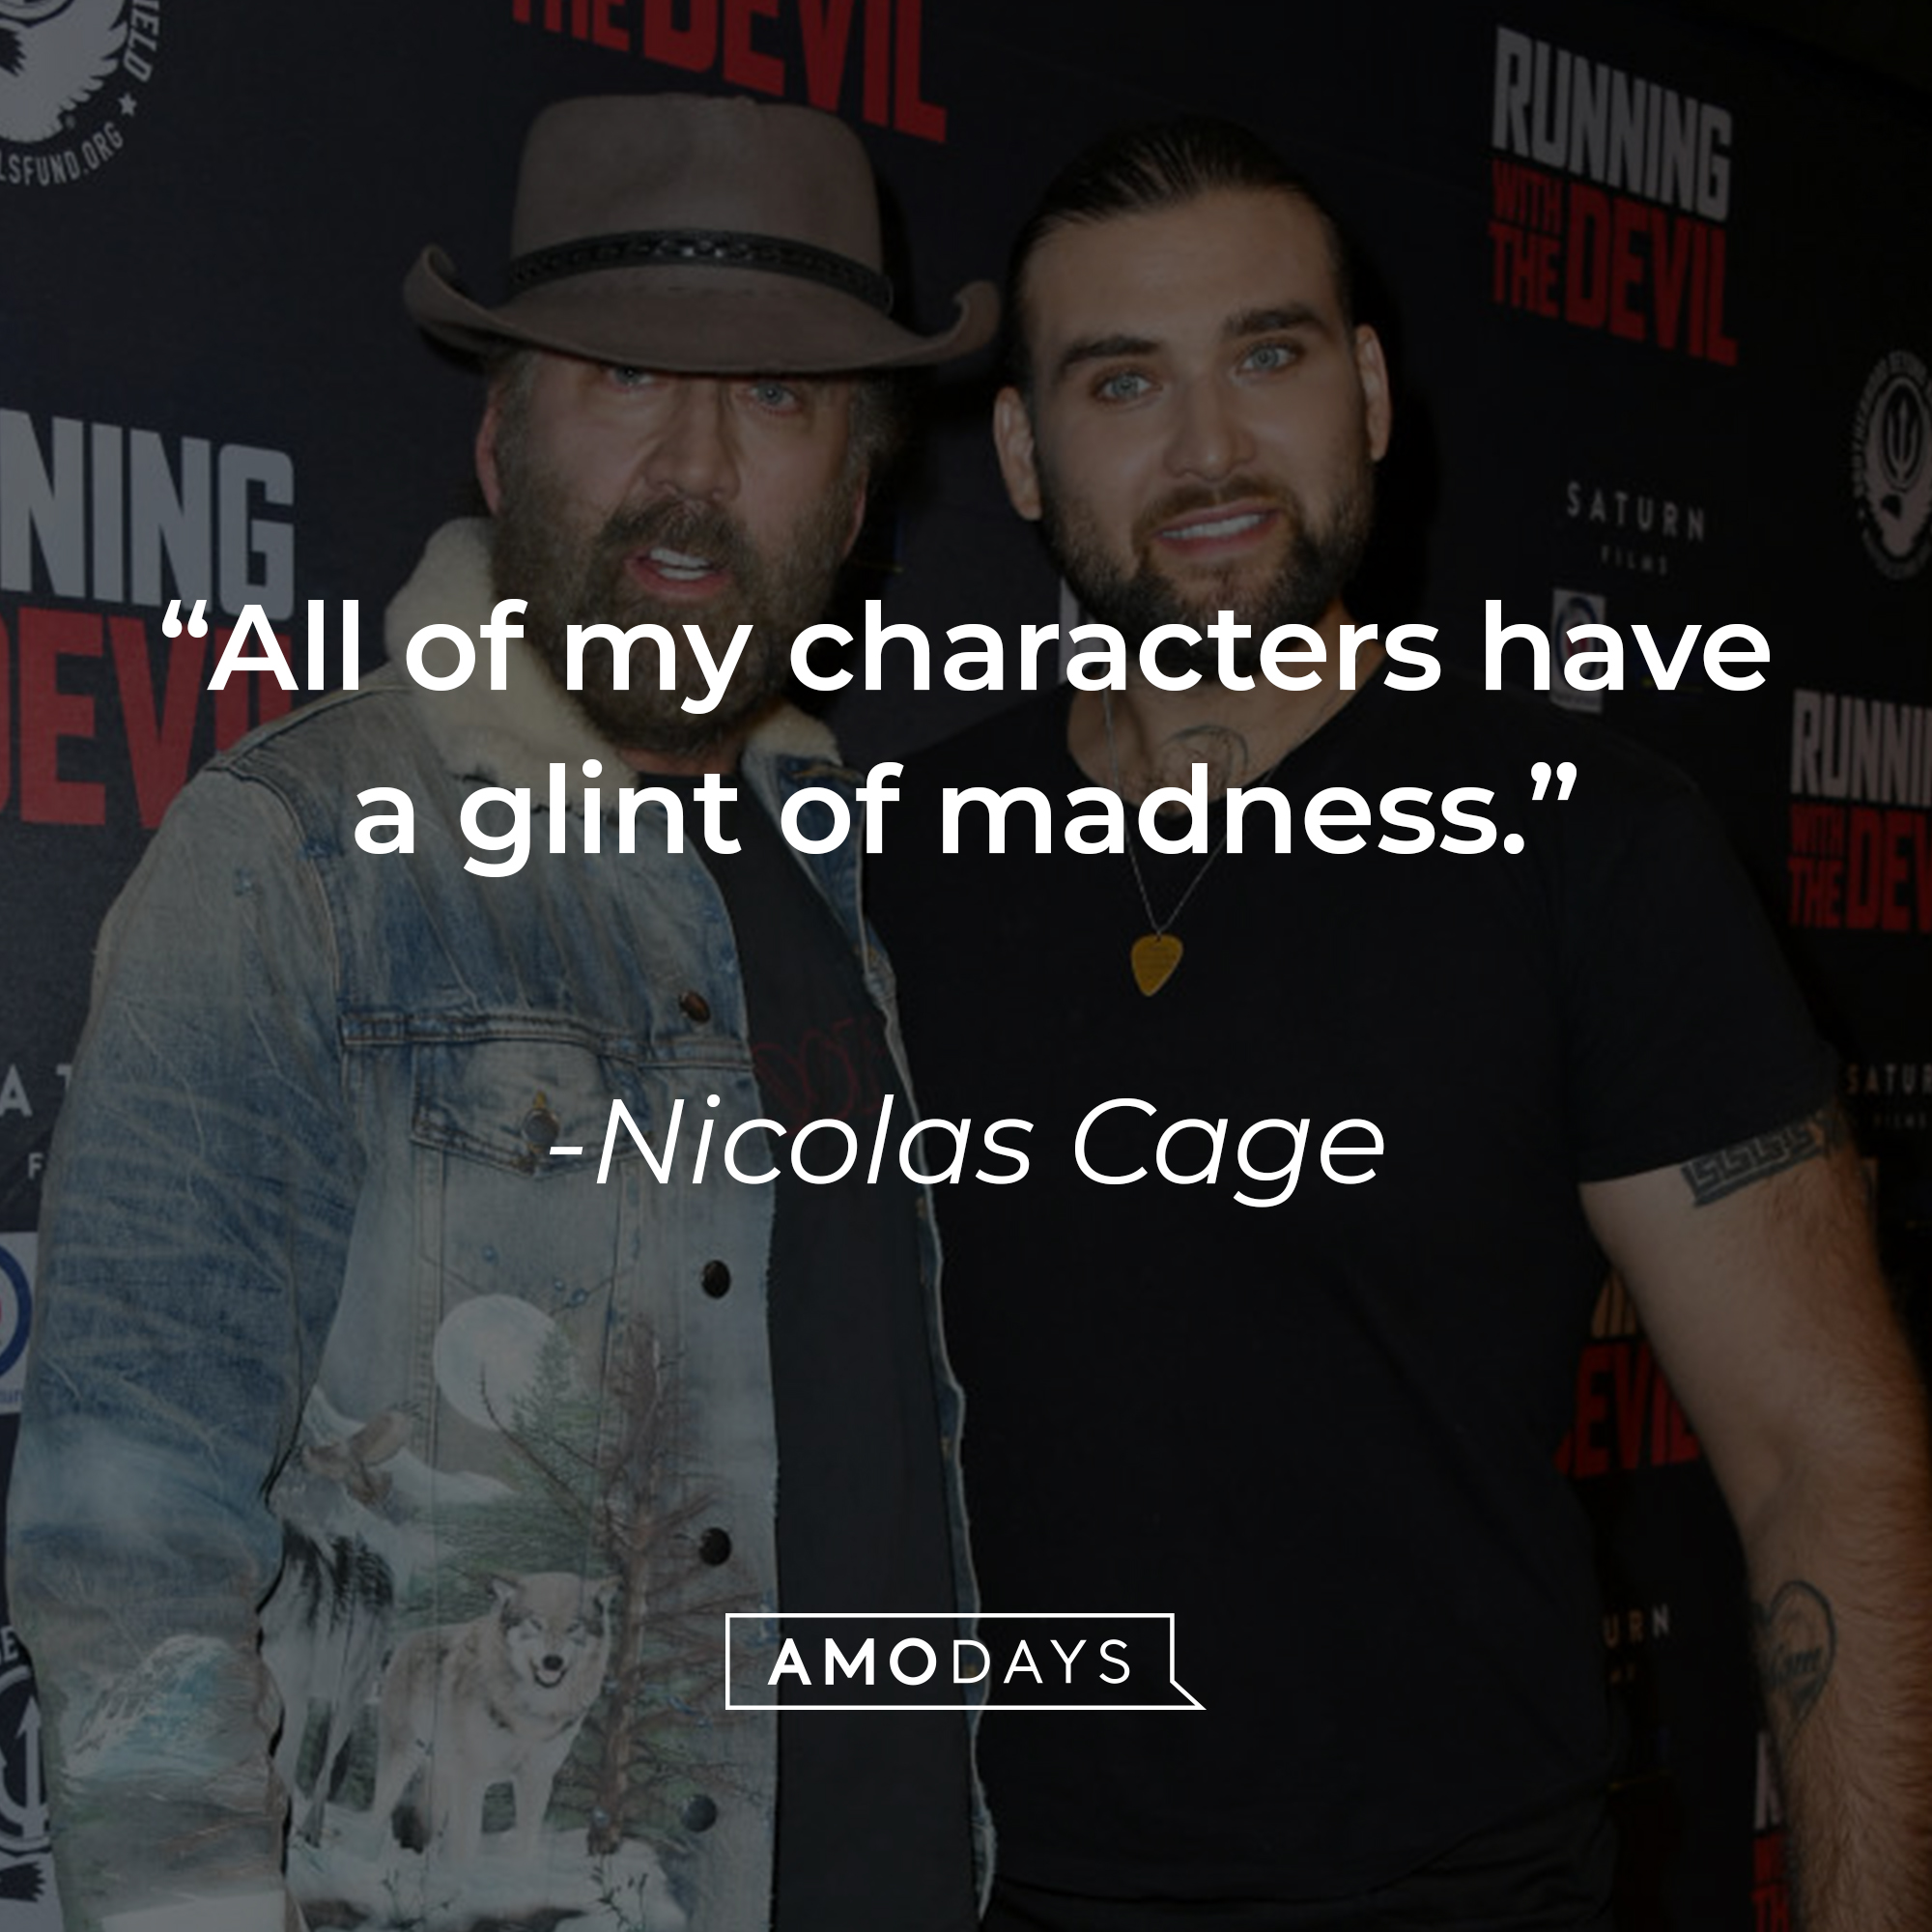 Nicolas Cage's quote: "All of my characters have a glint of madness." | Source: Getty Images